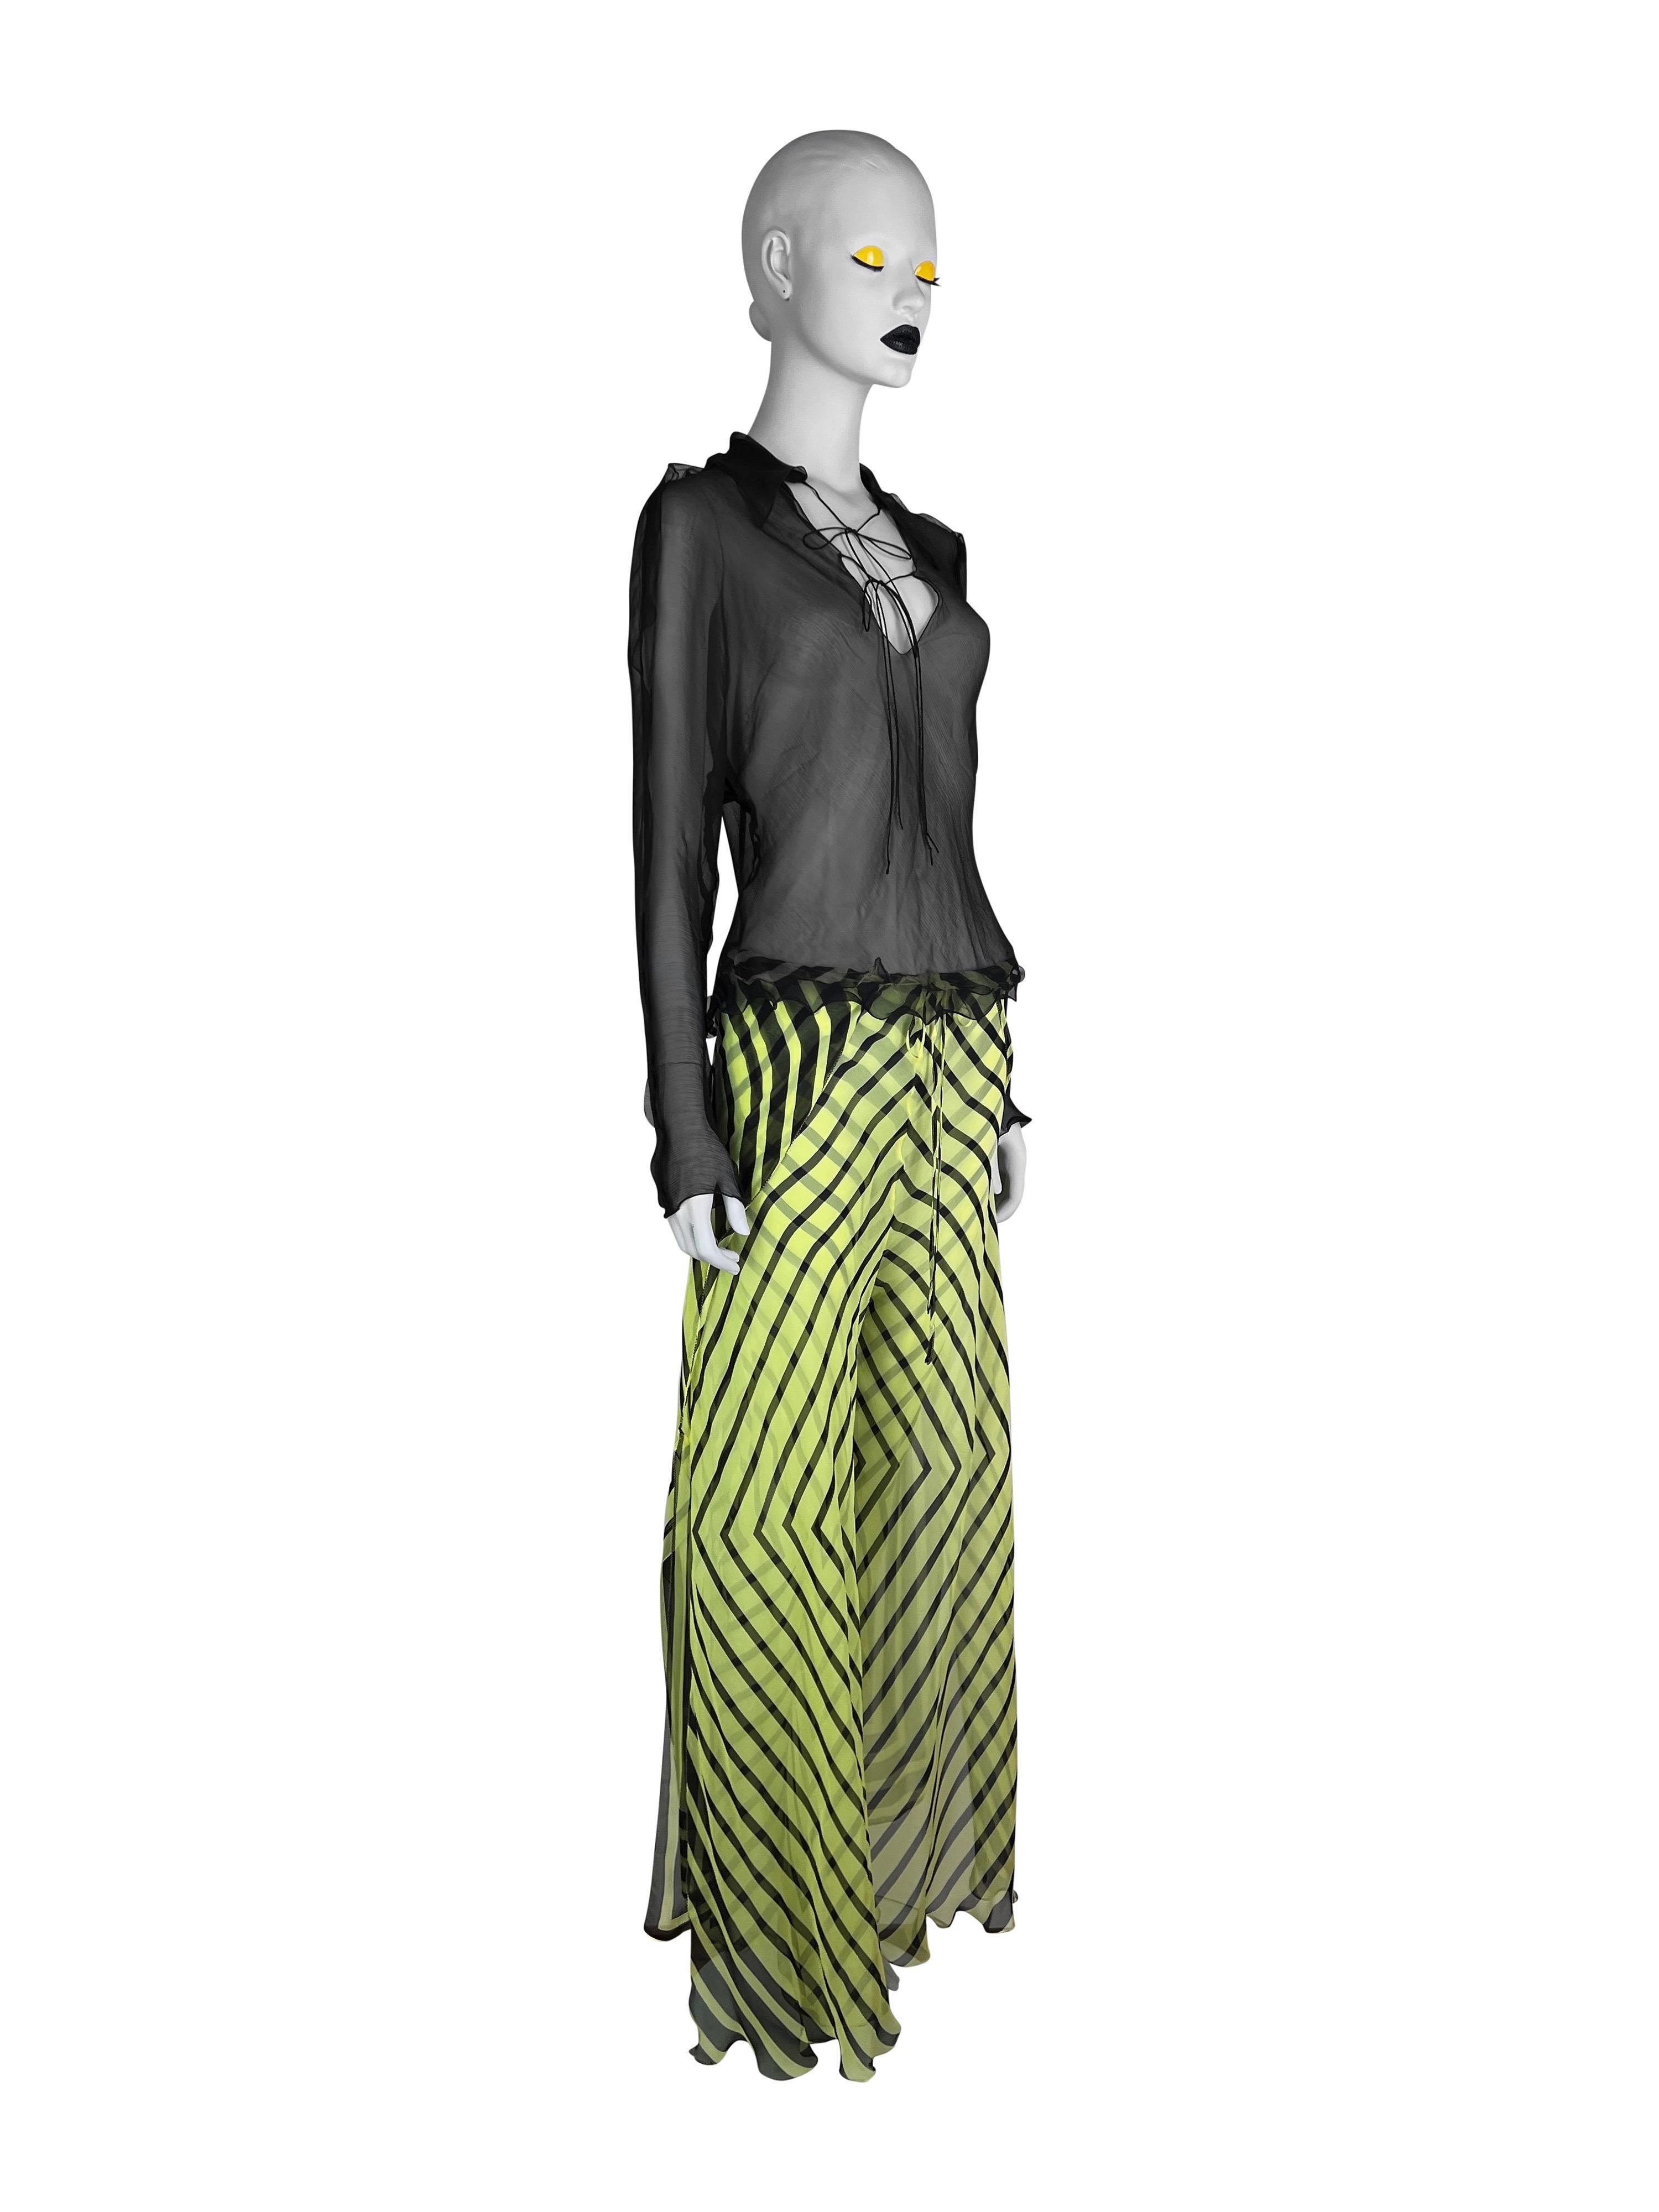 Fendi by Karl Lagerfeld Spring 2000 Doubled Layered Graphic Lime Bias-Cut Silk T For Sale 1